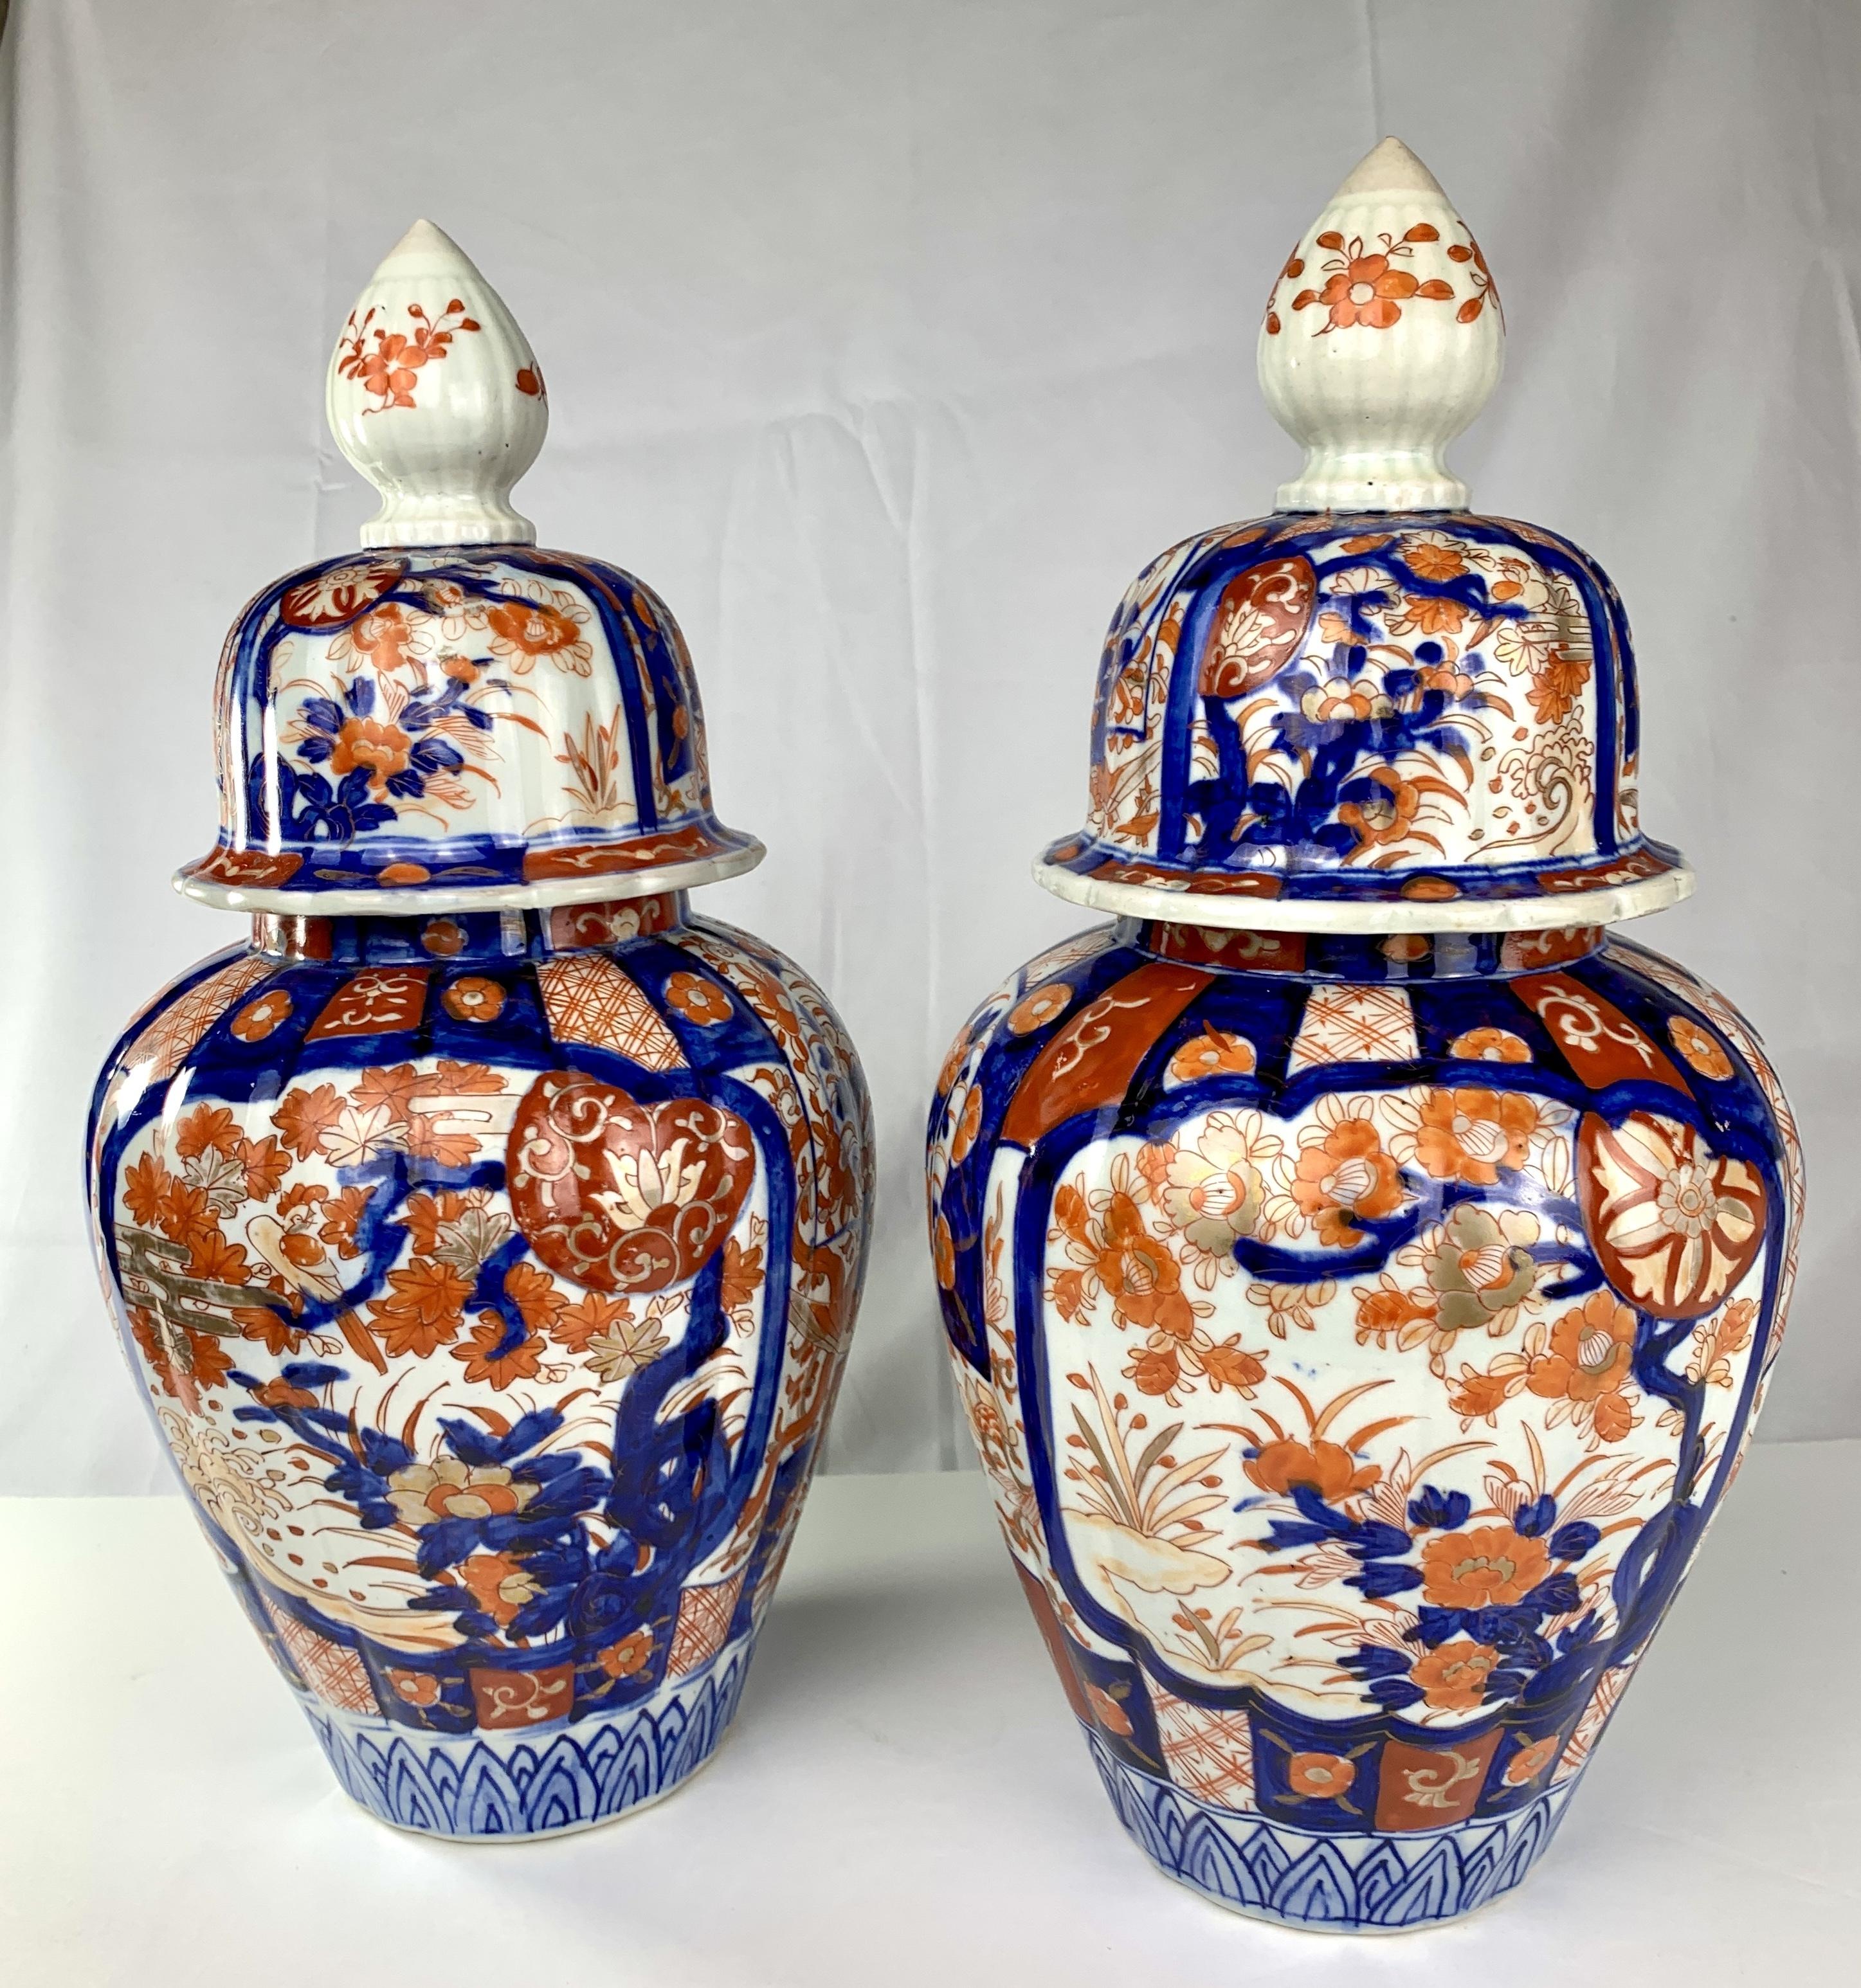 Hand-painted in Imari designs, both jars show beautiful waterside scenes in cobalt blue, gilt, and two tones of iron red. 
The colors are exquisite and intense. We see water lilies, lotus, peonies, and bellflowers.  One jar shows a shoreline the